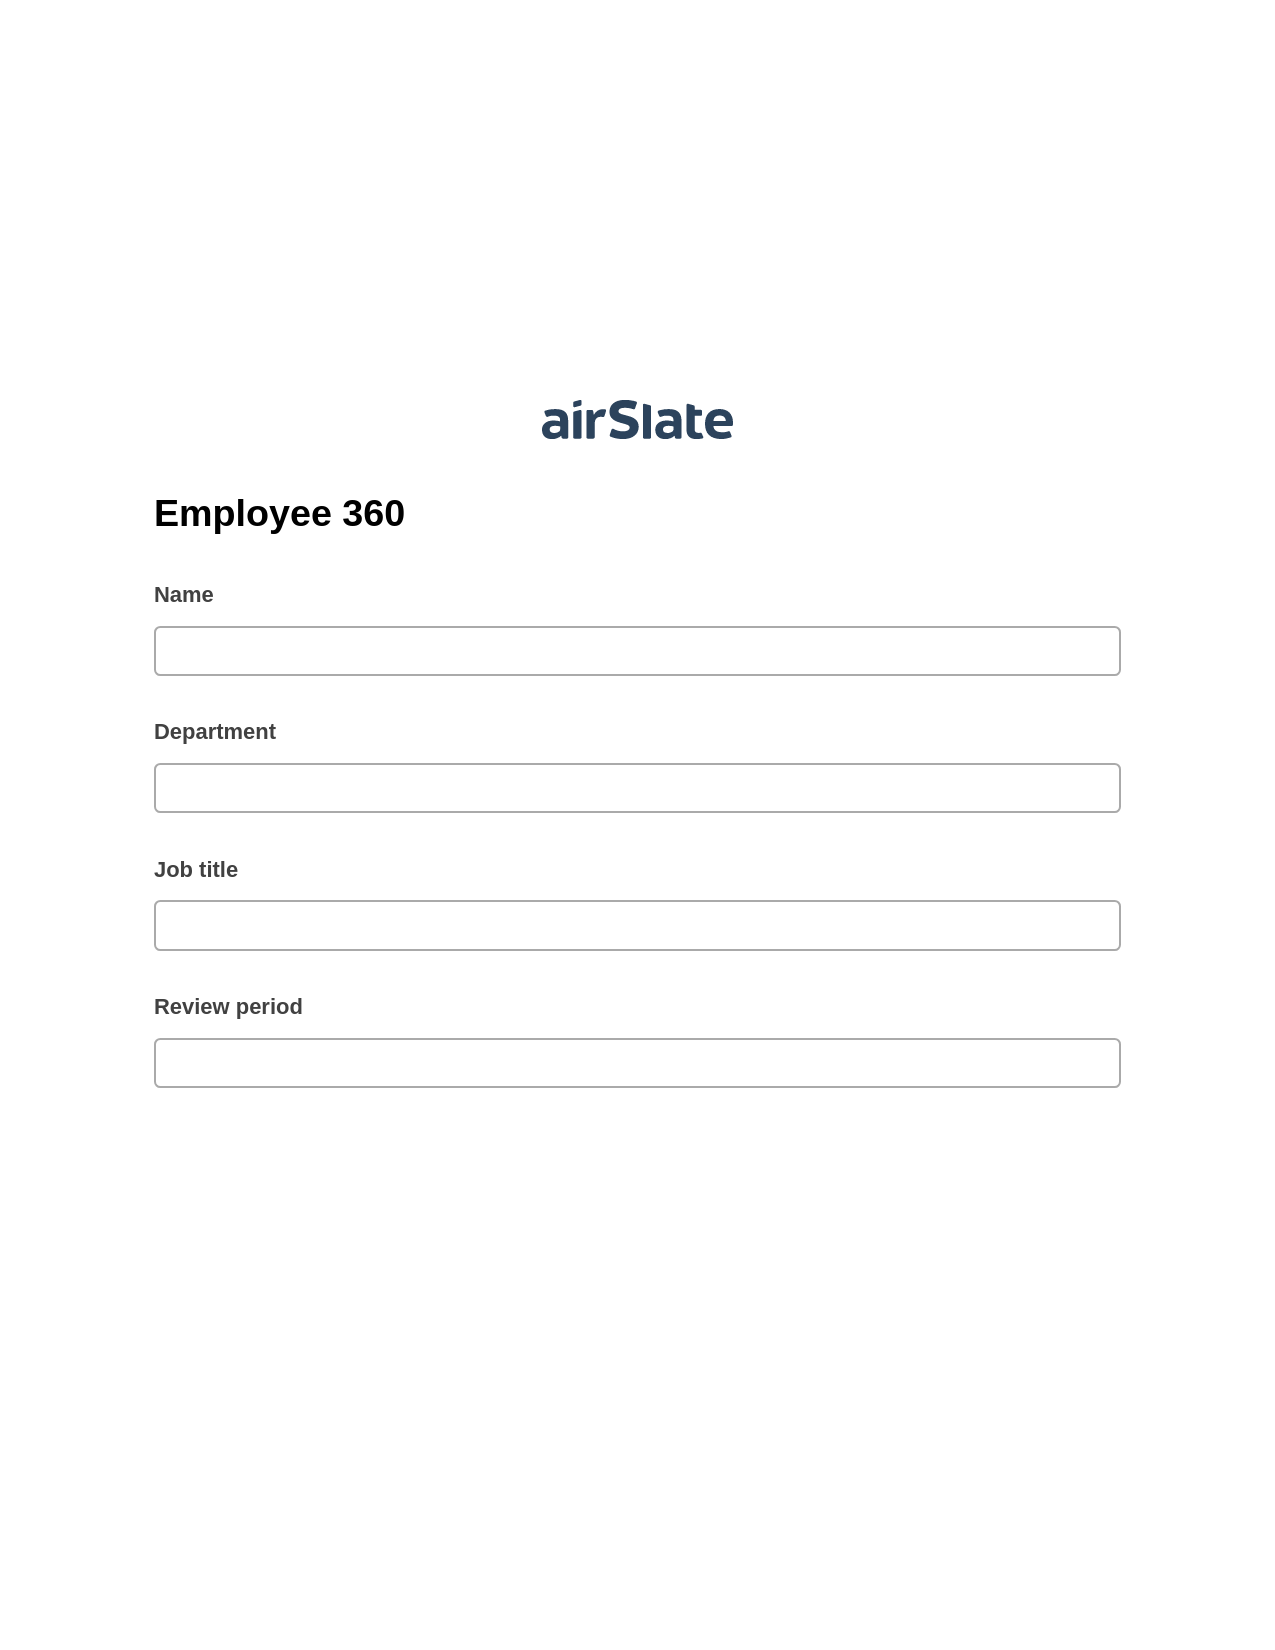 Employee 360 Pre-fill from Excel Spreadsheet Bot, Google Cloud Print Bot, Post-finish Document Bot